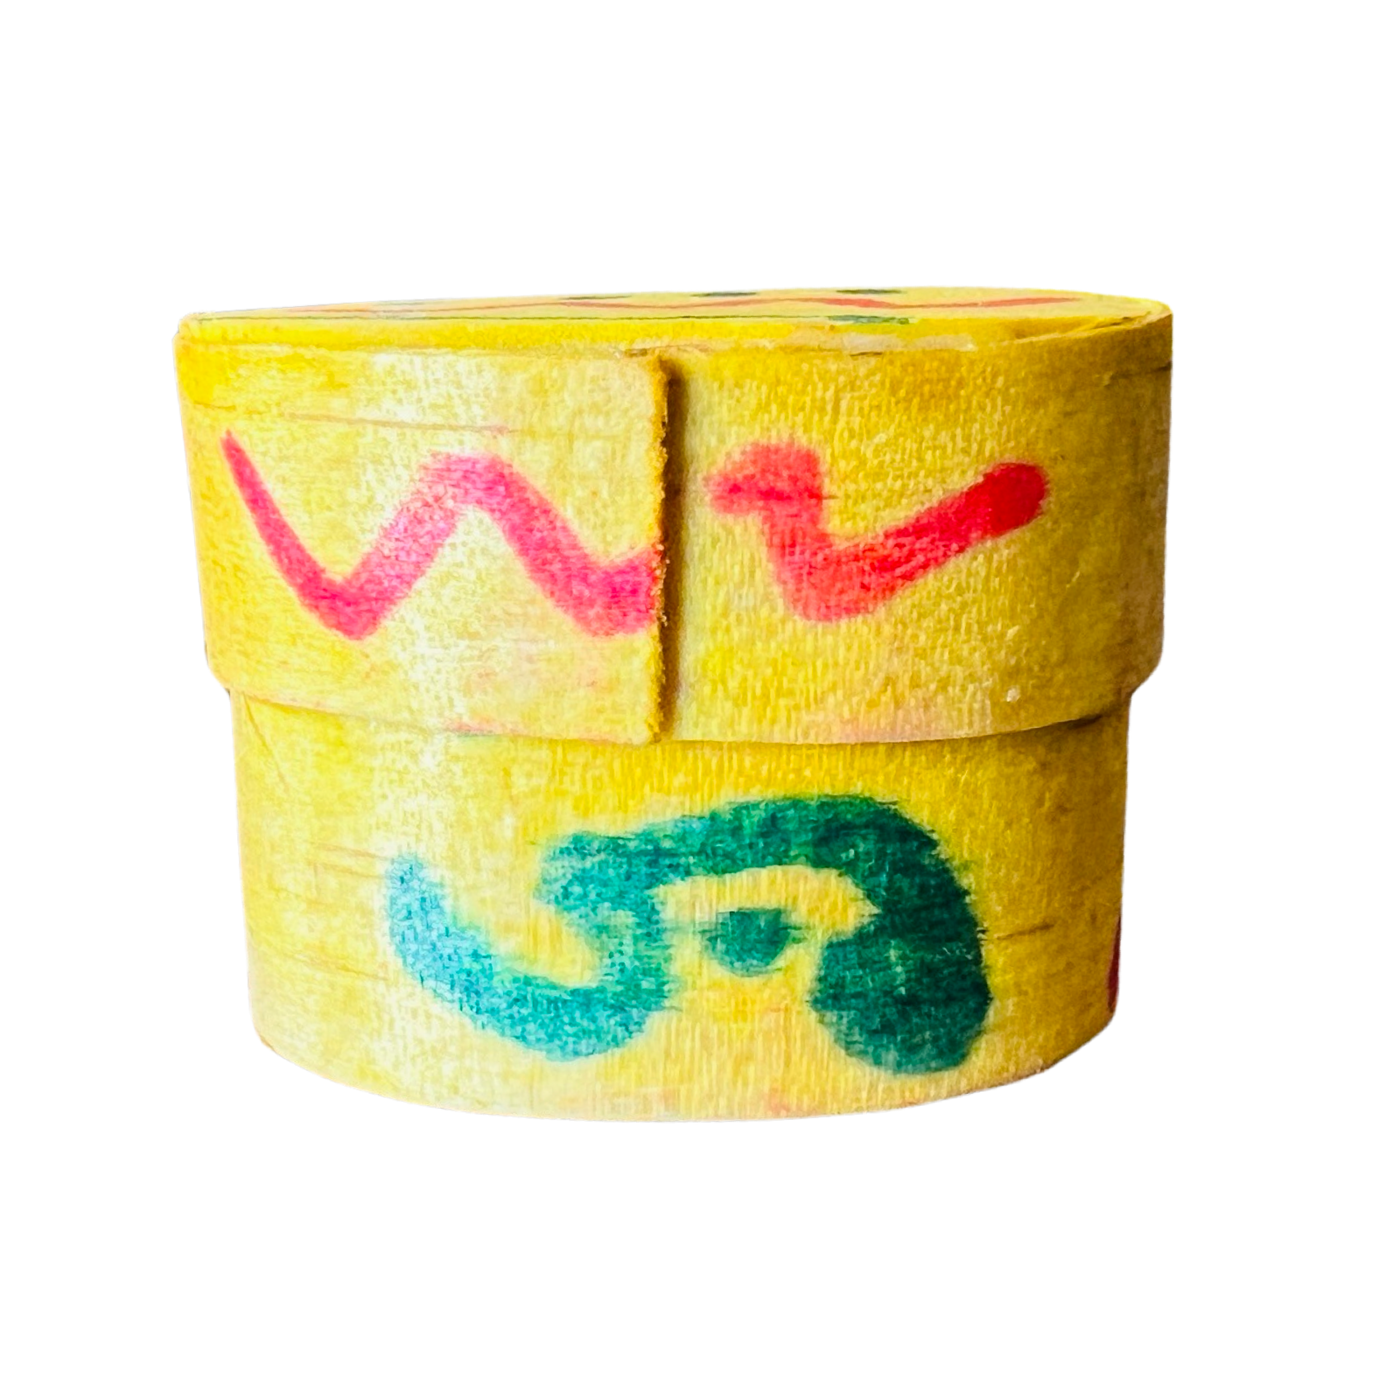 yellow wooden box with red and green designs